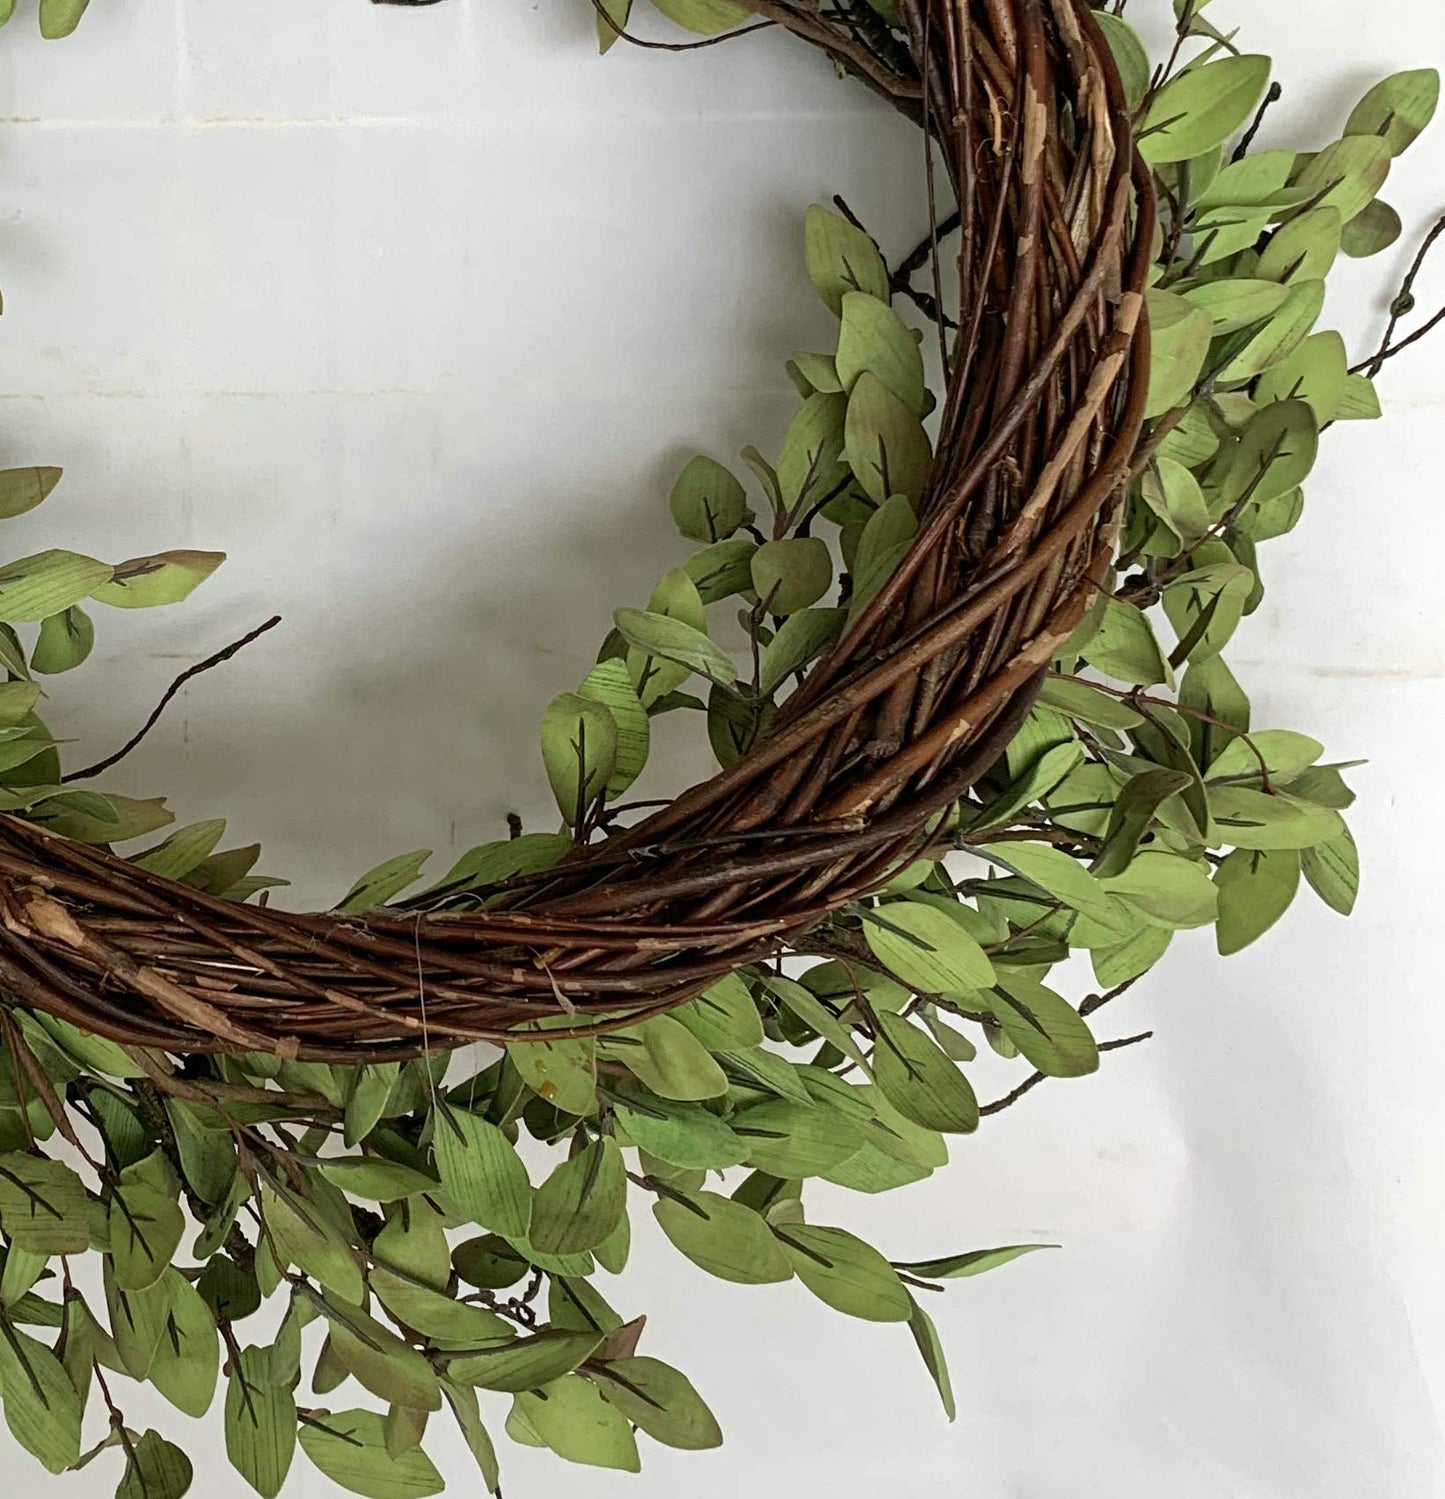 Fresh Green Tea Leaves: 24-Inch Spring Front Door Wreath with Handcrafted Twigs